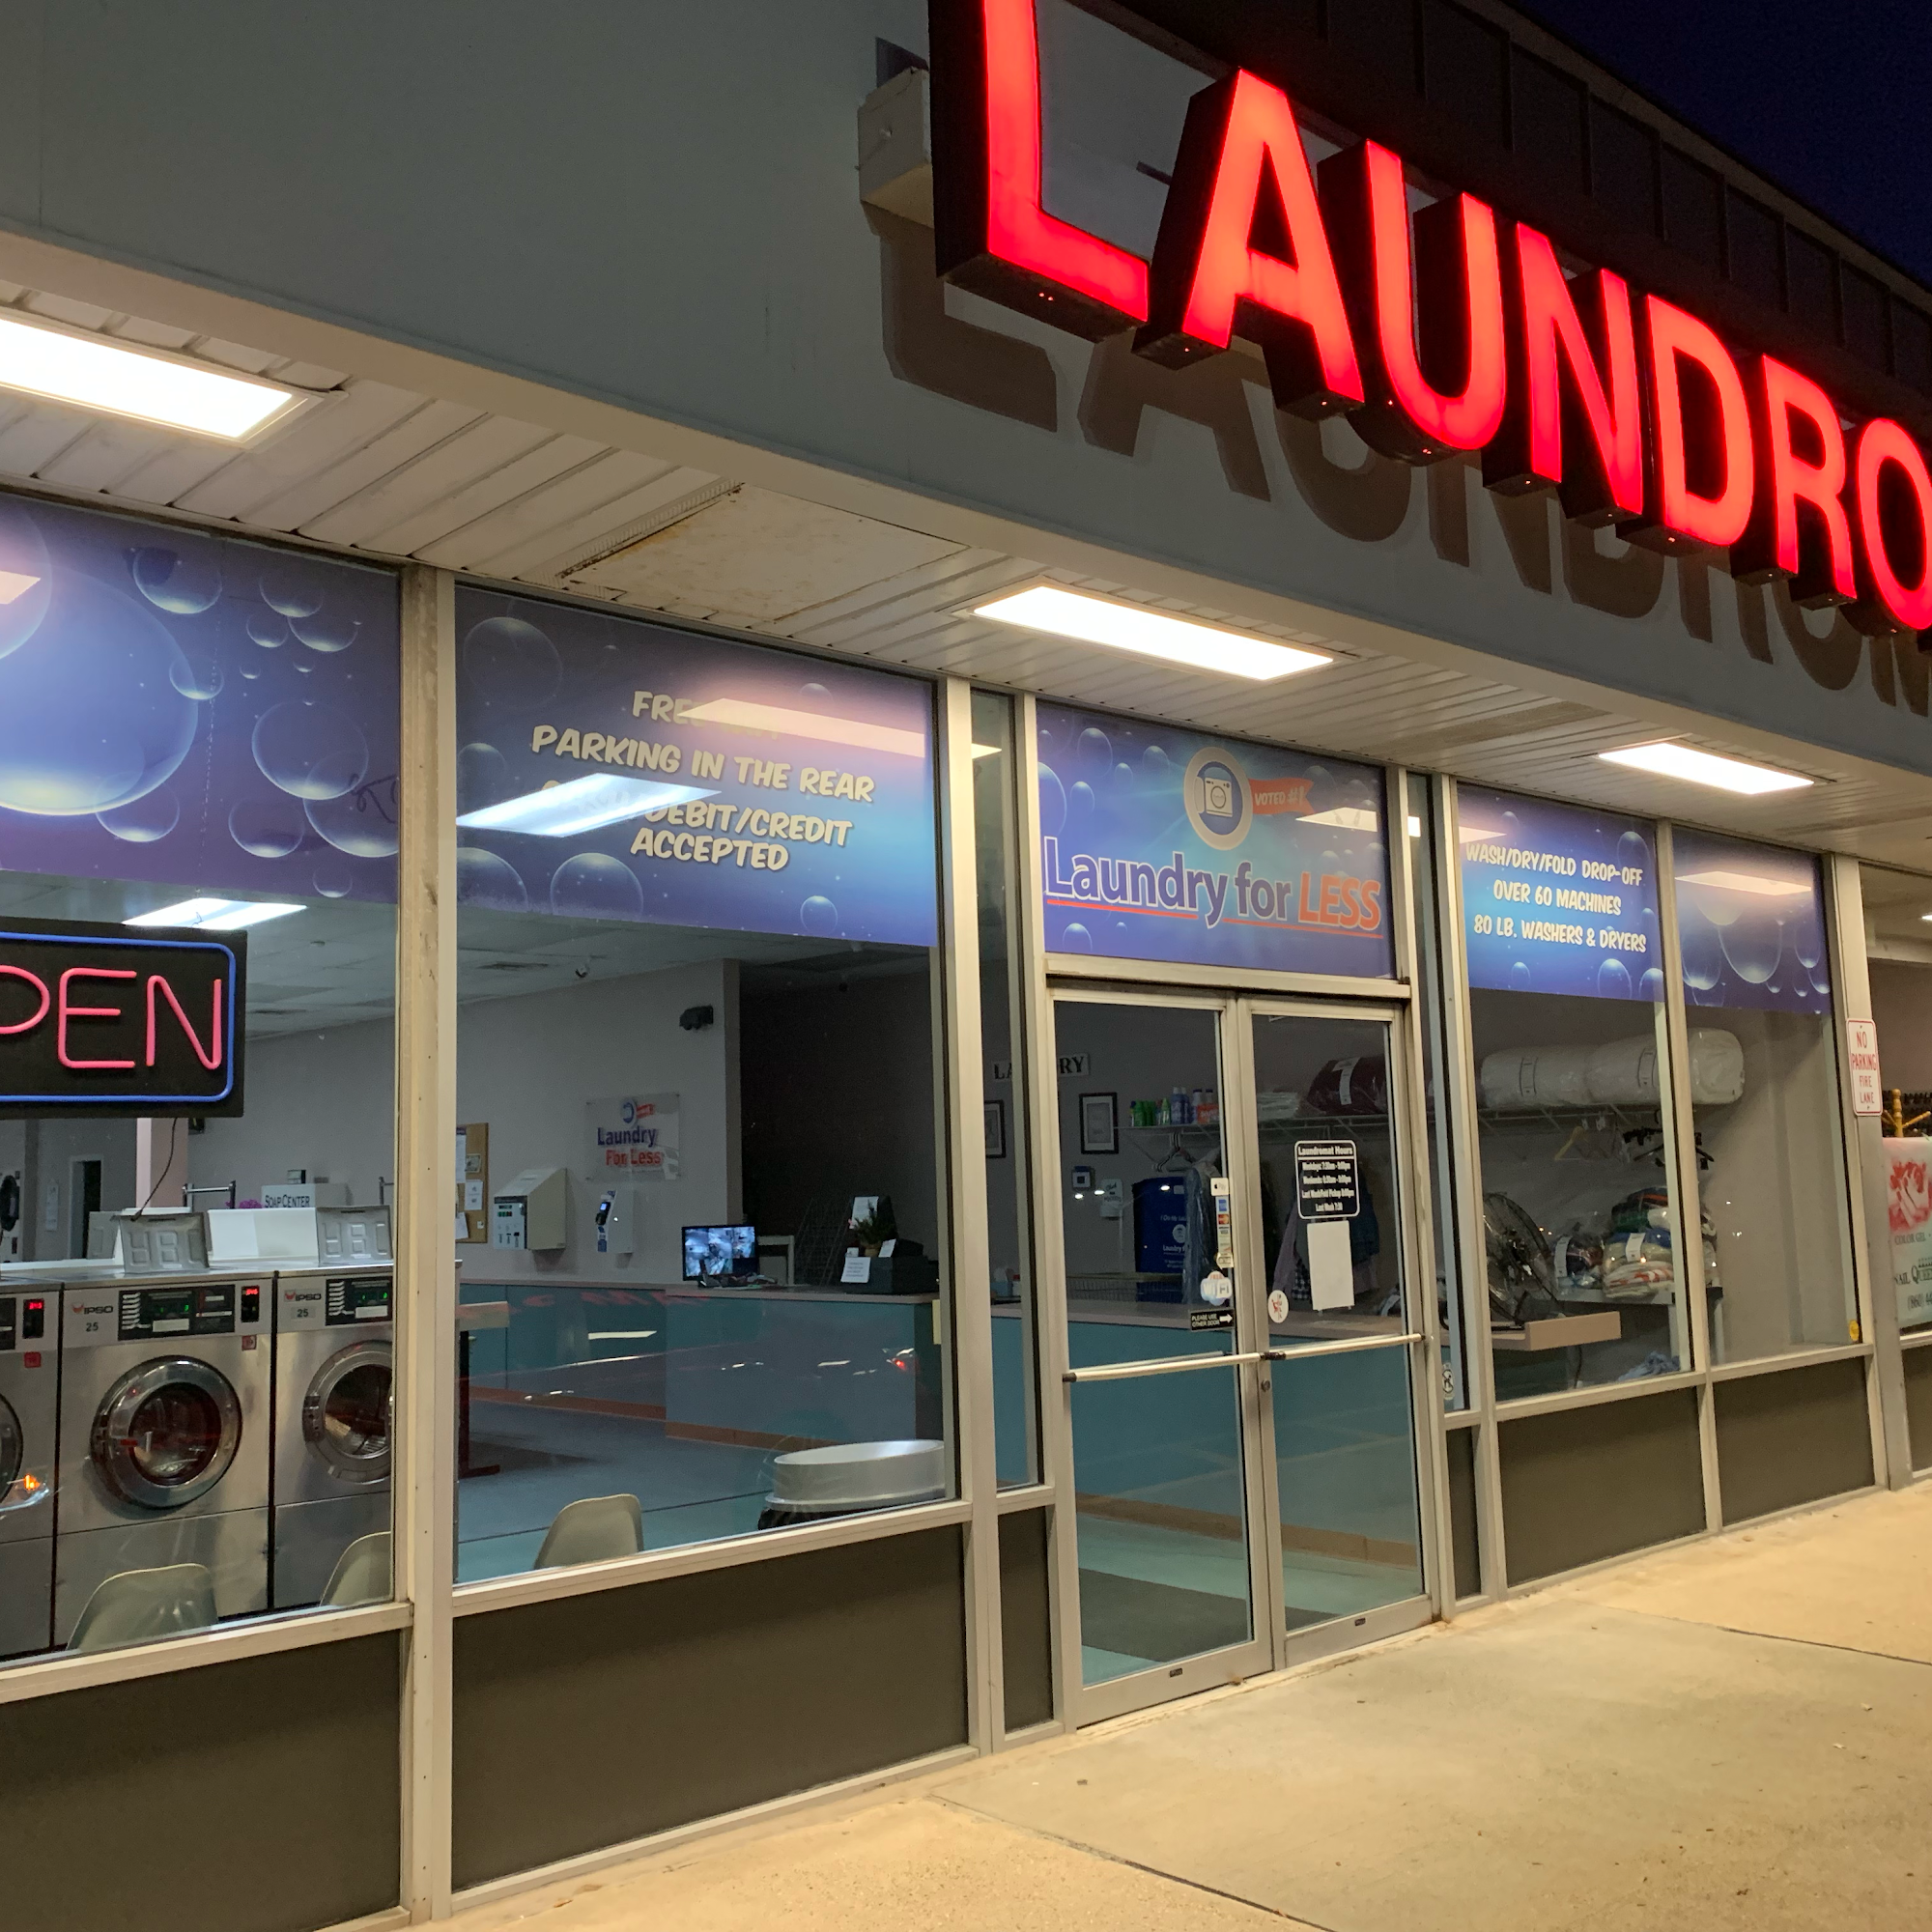 The Laundry Room of Waterford-Free Pick up and Delivery, Compare at $1.90 per pound!